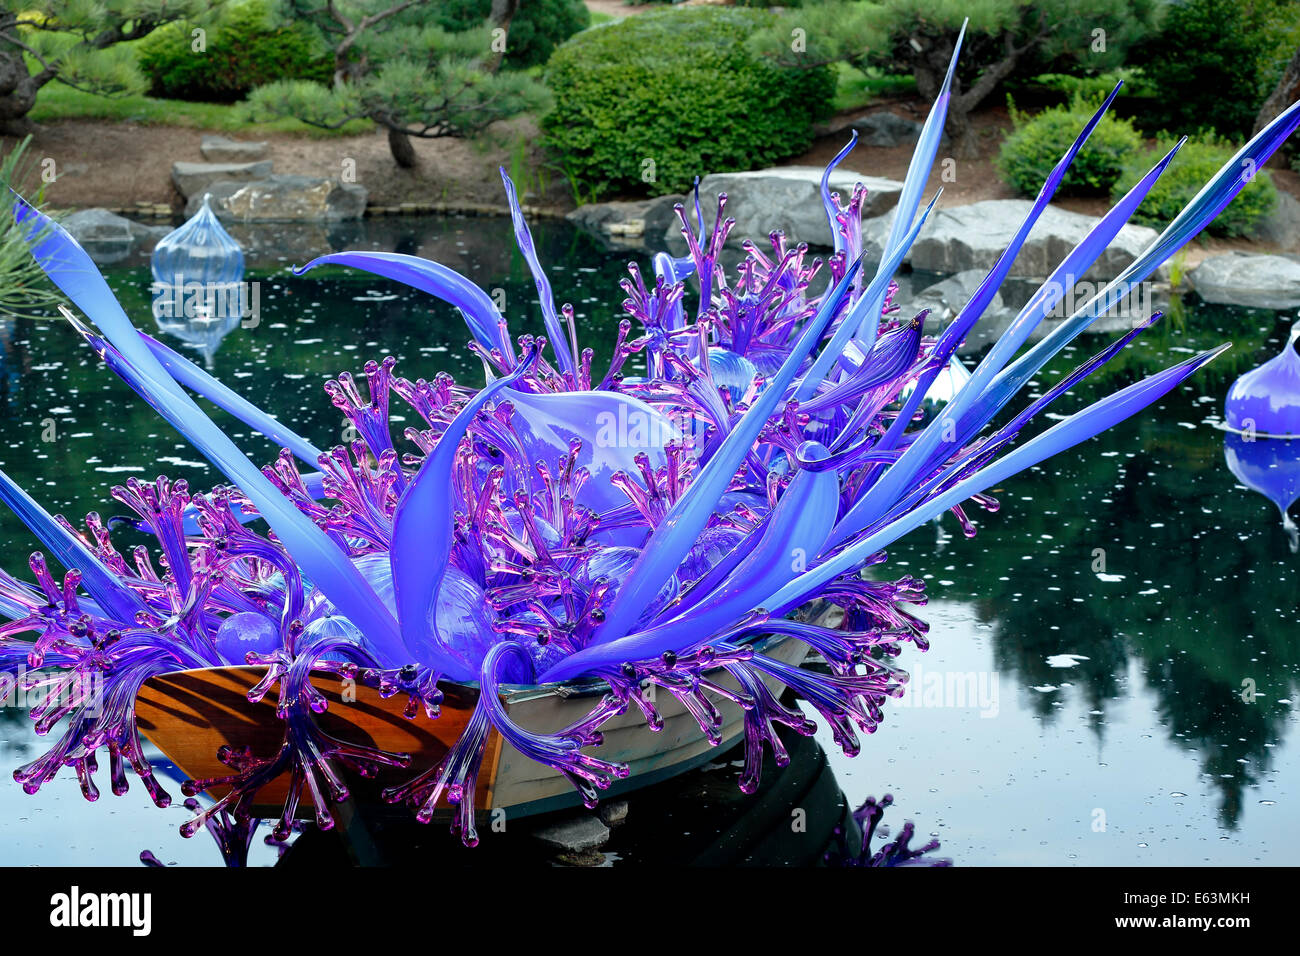 'Blue and Purple Boat' glass sculpture, by Dale Chihuly, Japanese Garden, Denver Botanic Gardens, Denver, Colorado USA Stock Photo